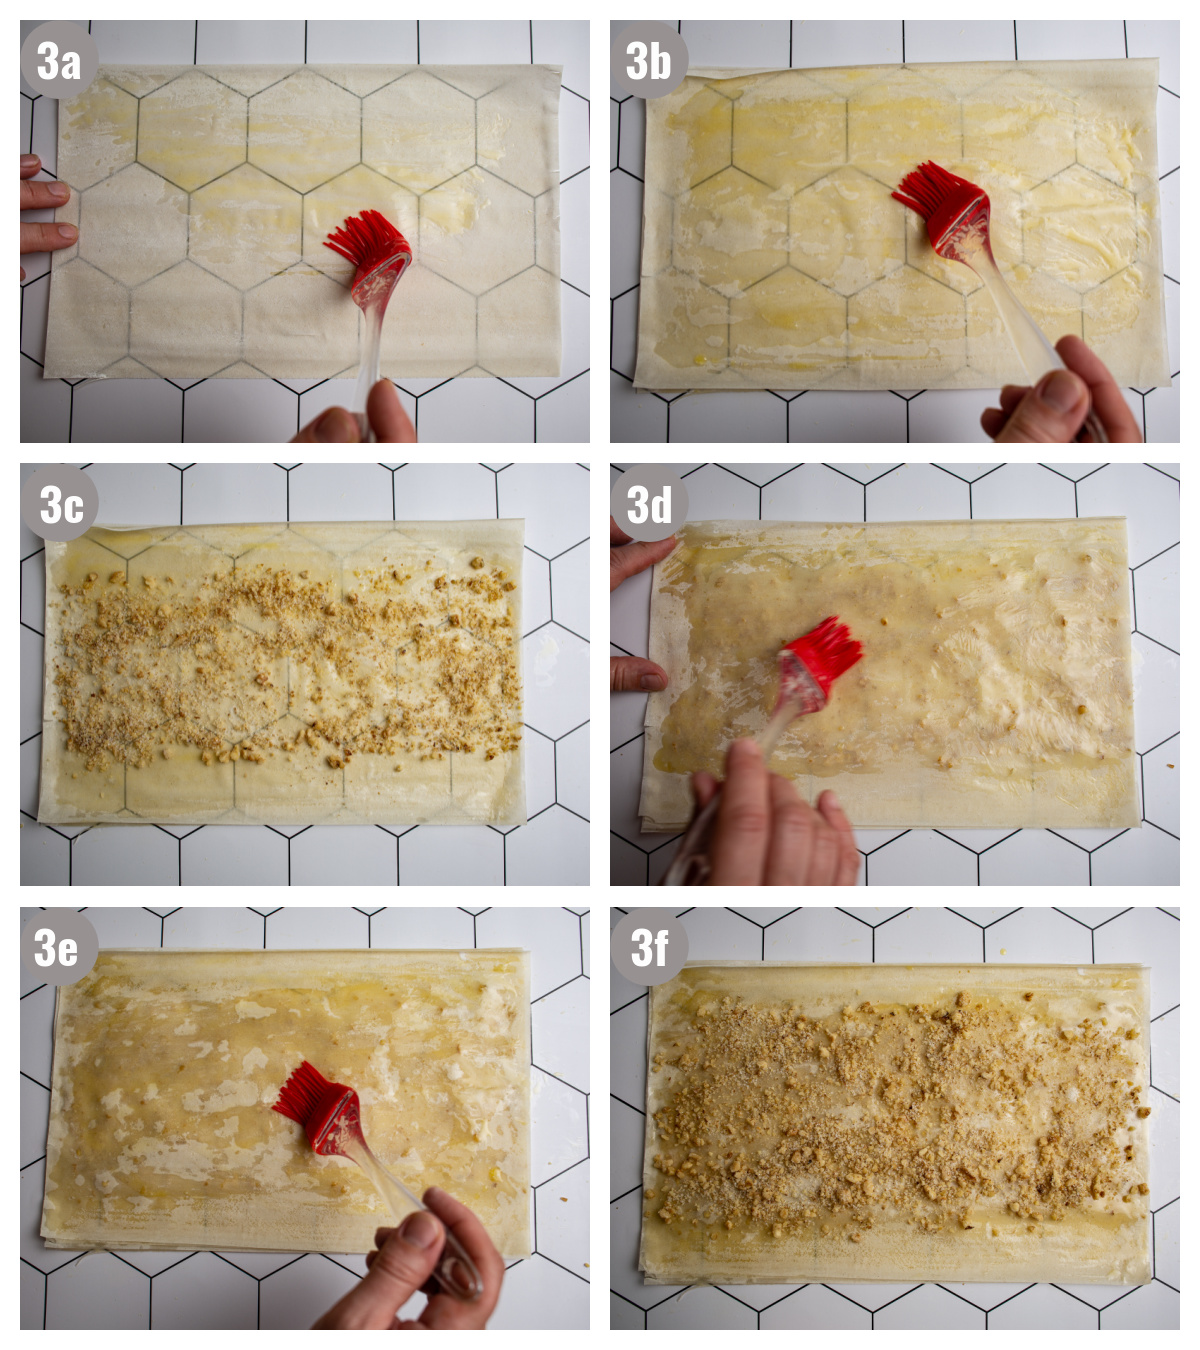 Six photos of phyllo, two per row.